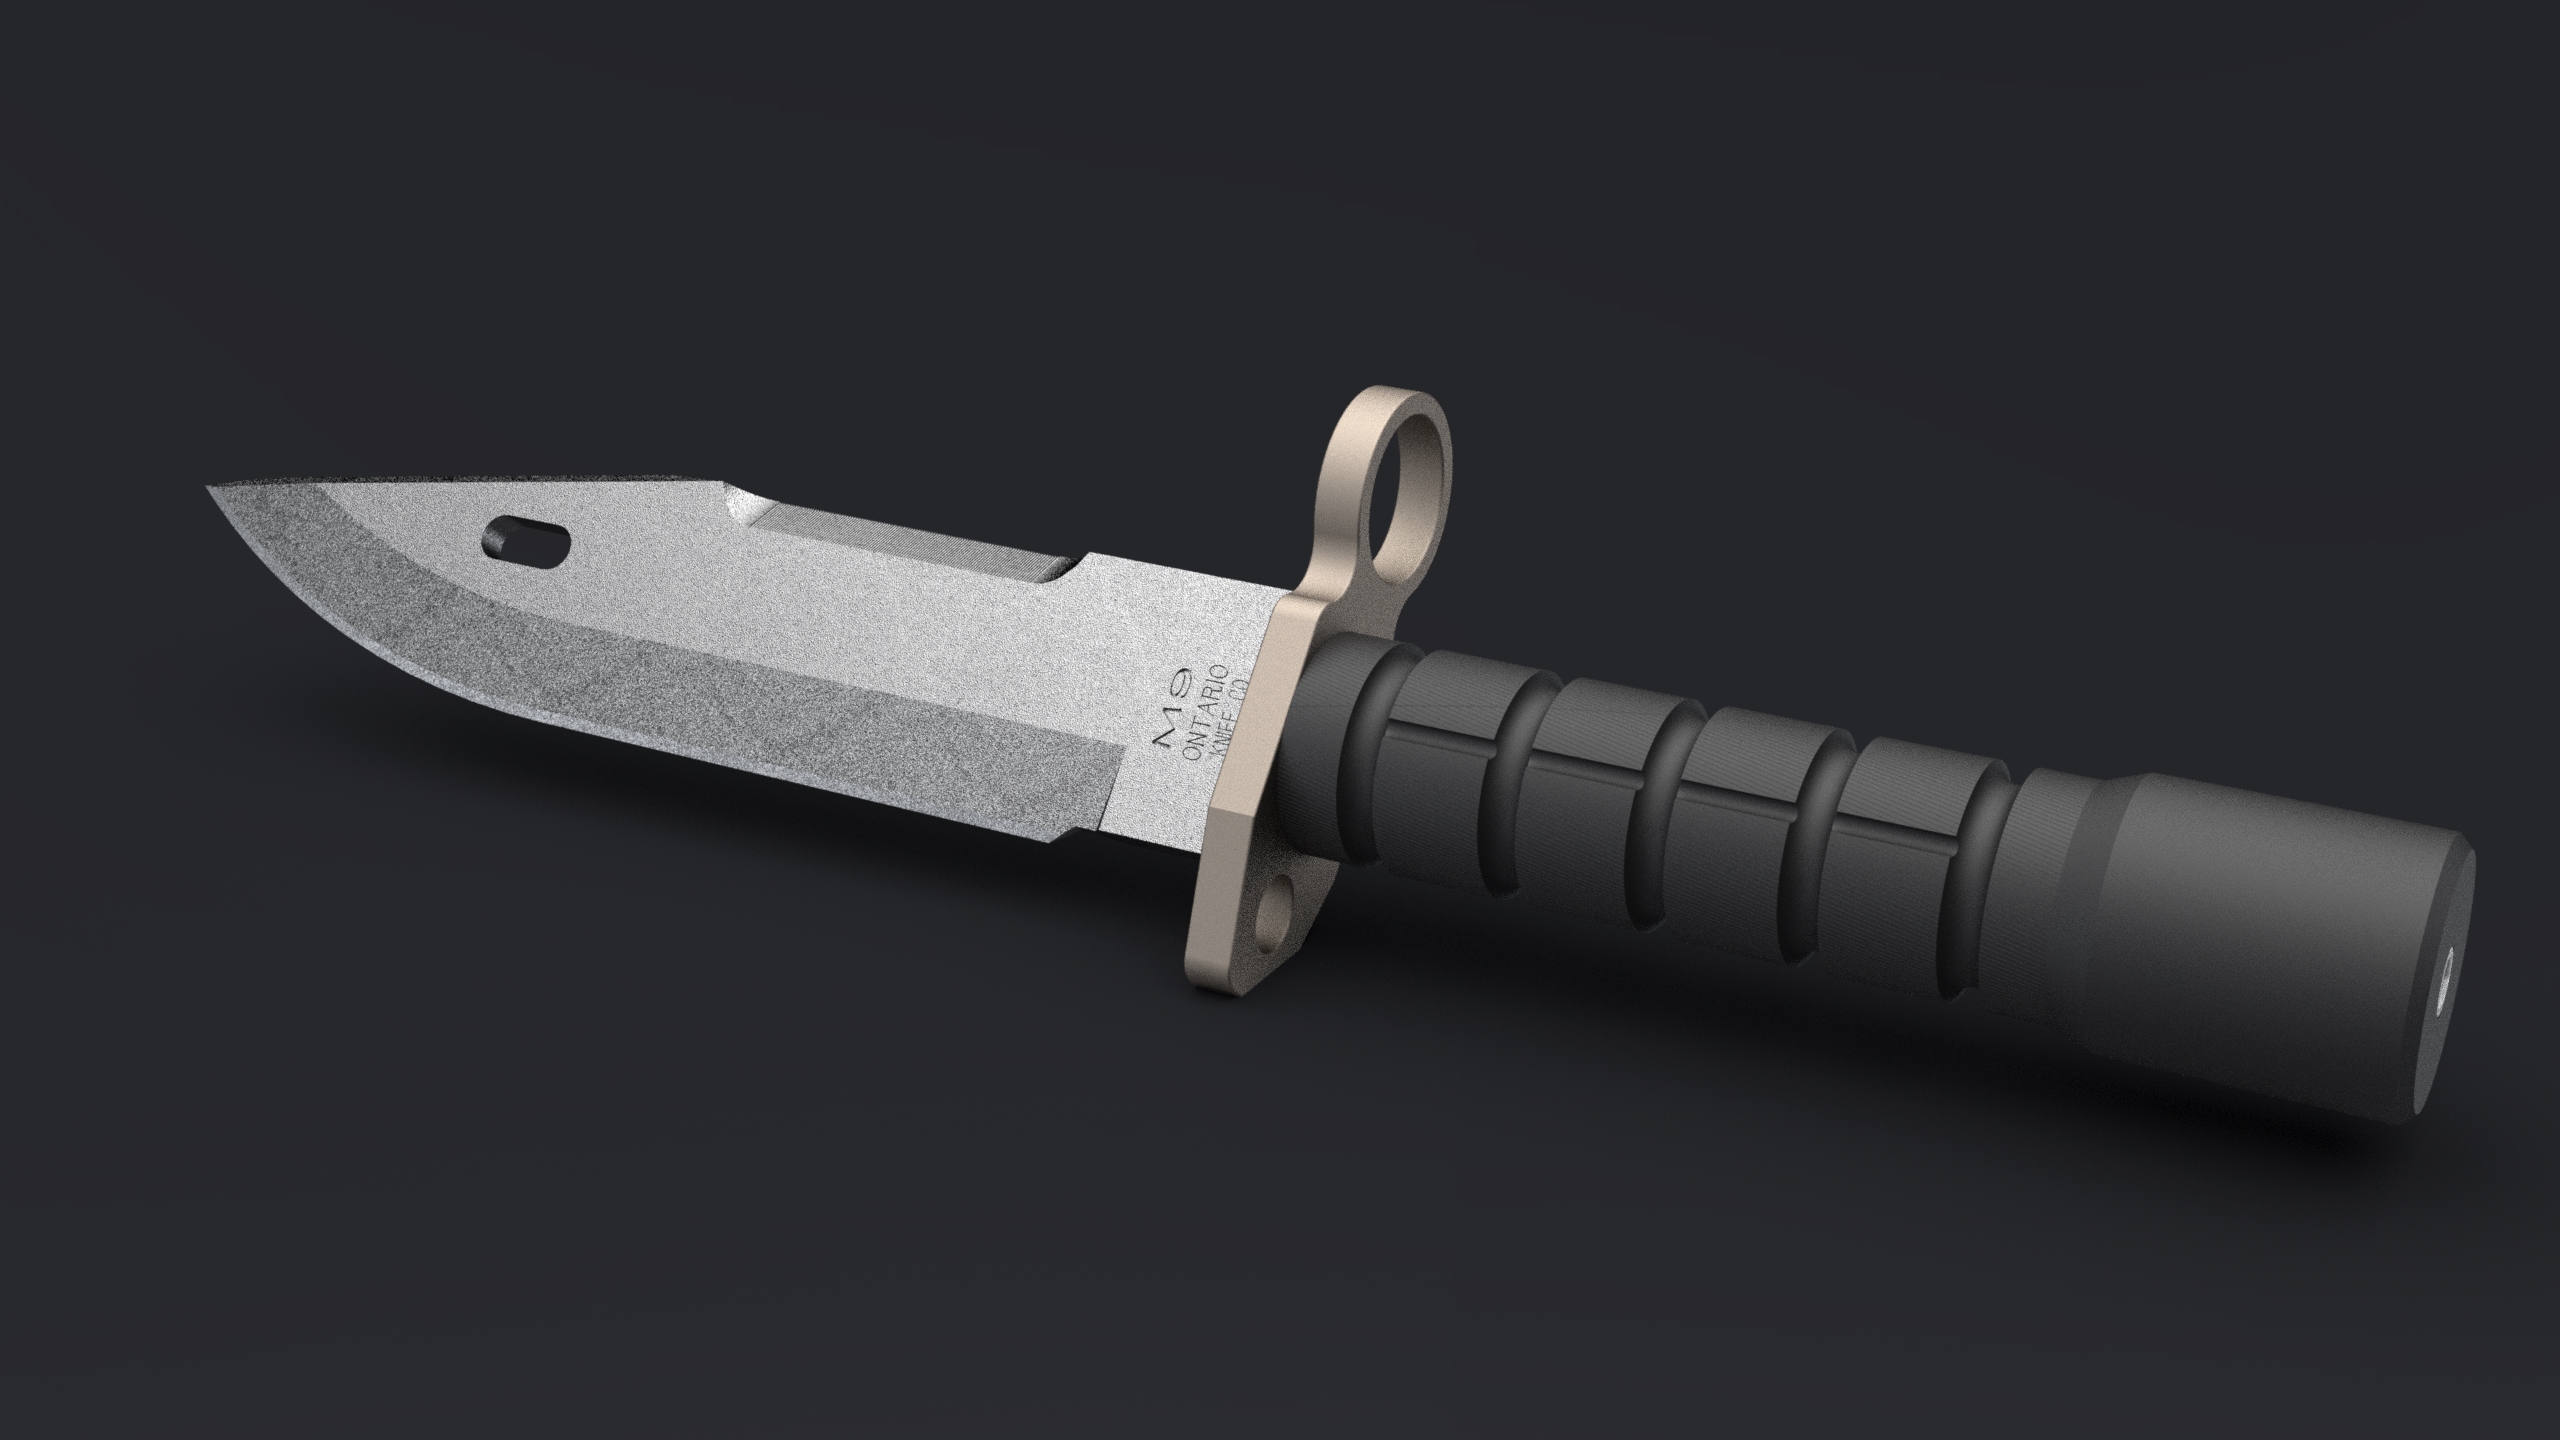 Saber Sword Counter Strike Global Offensive Knife Weapon PC Gaming 2560x1440